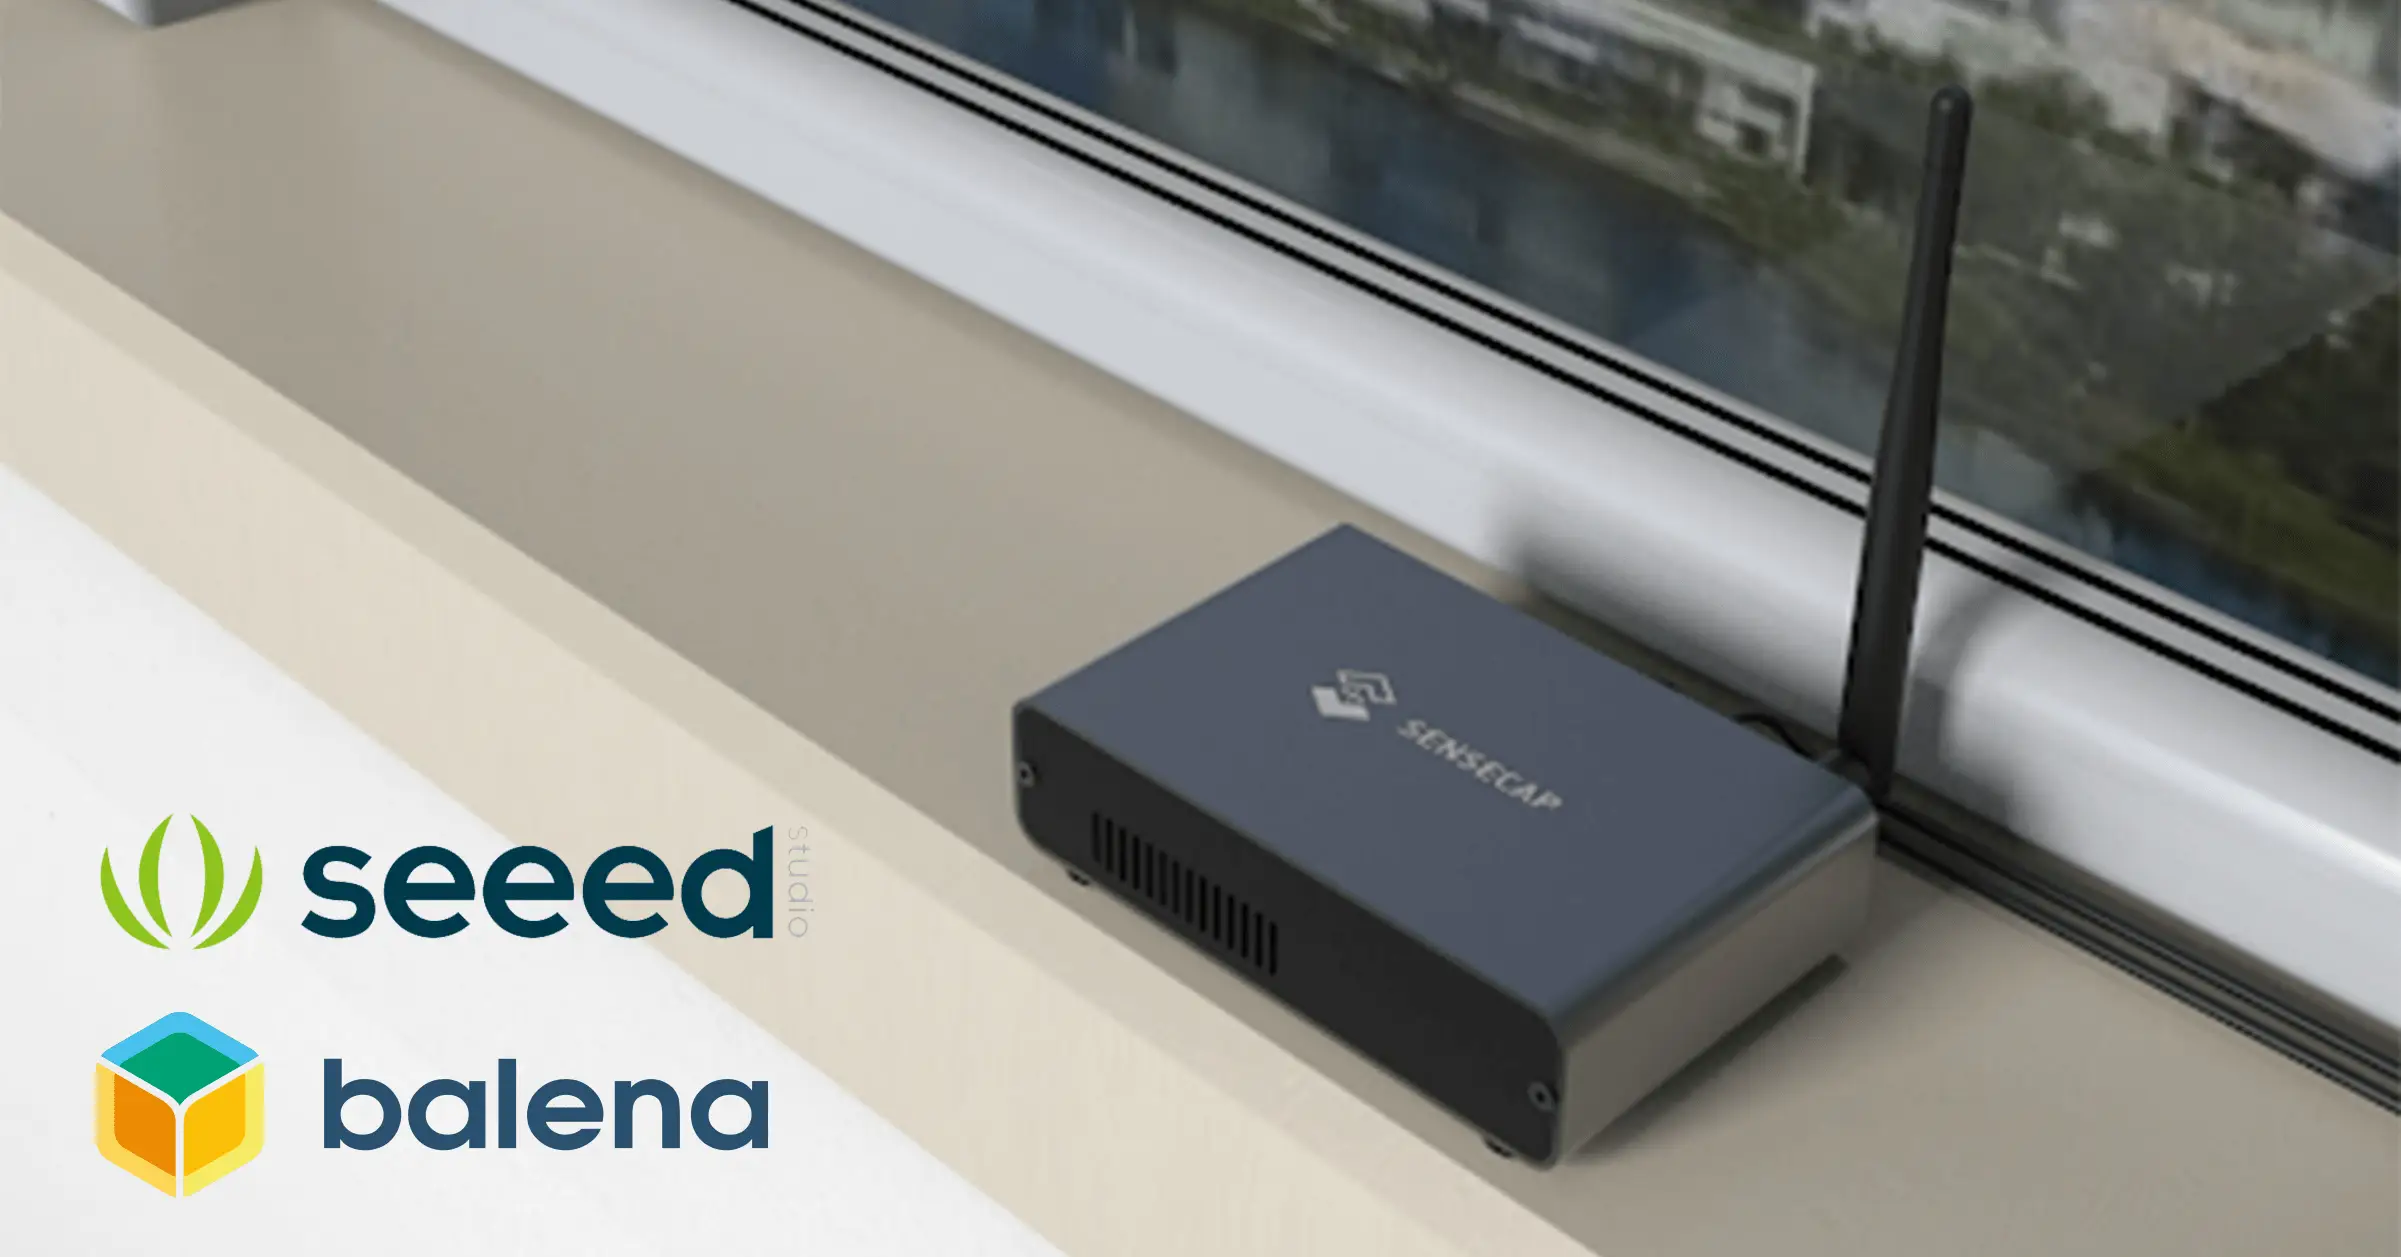 Seeed Studio: The Story of How 200,000 LoRaWAN® Devices Were Deployed in one Year with balenaCloud